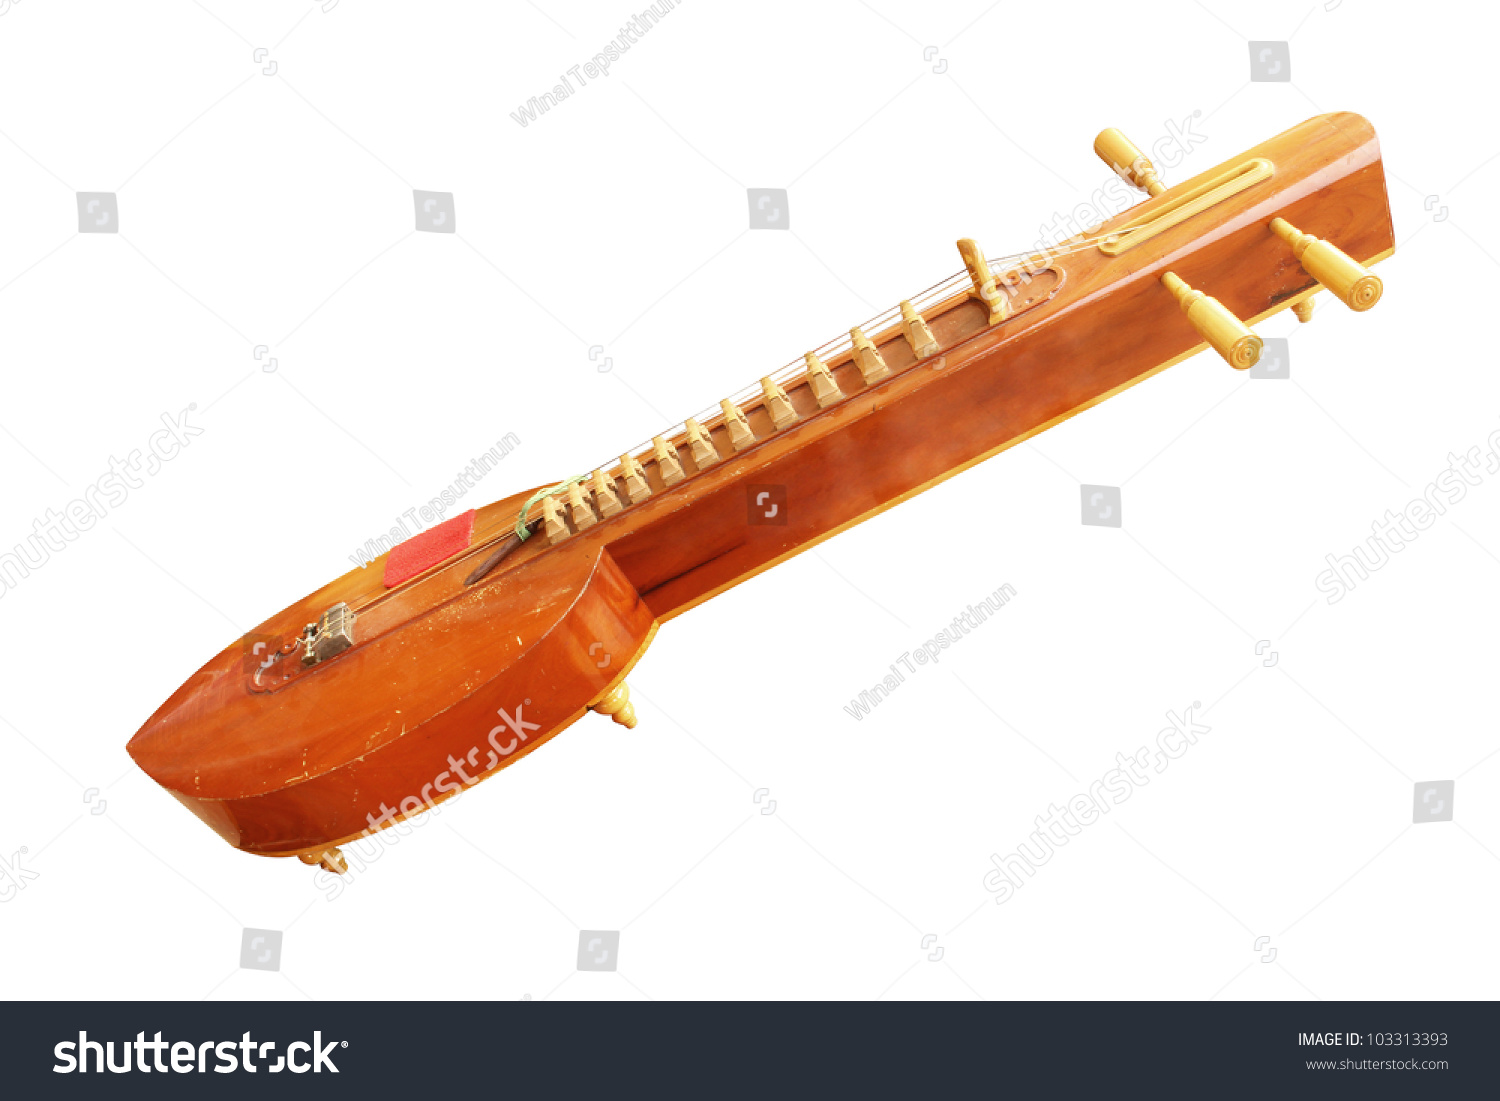 stock-photo-thai-zither-musical-instrume